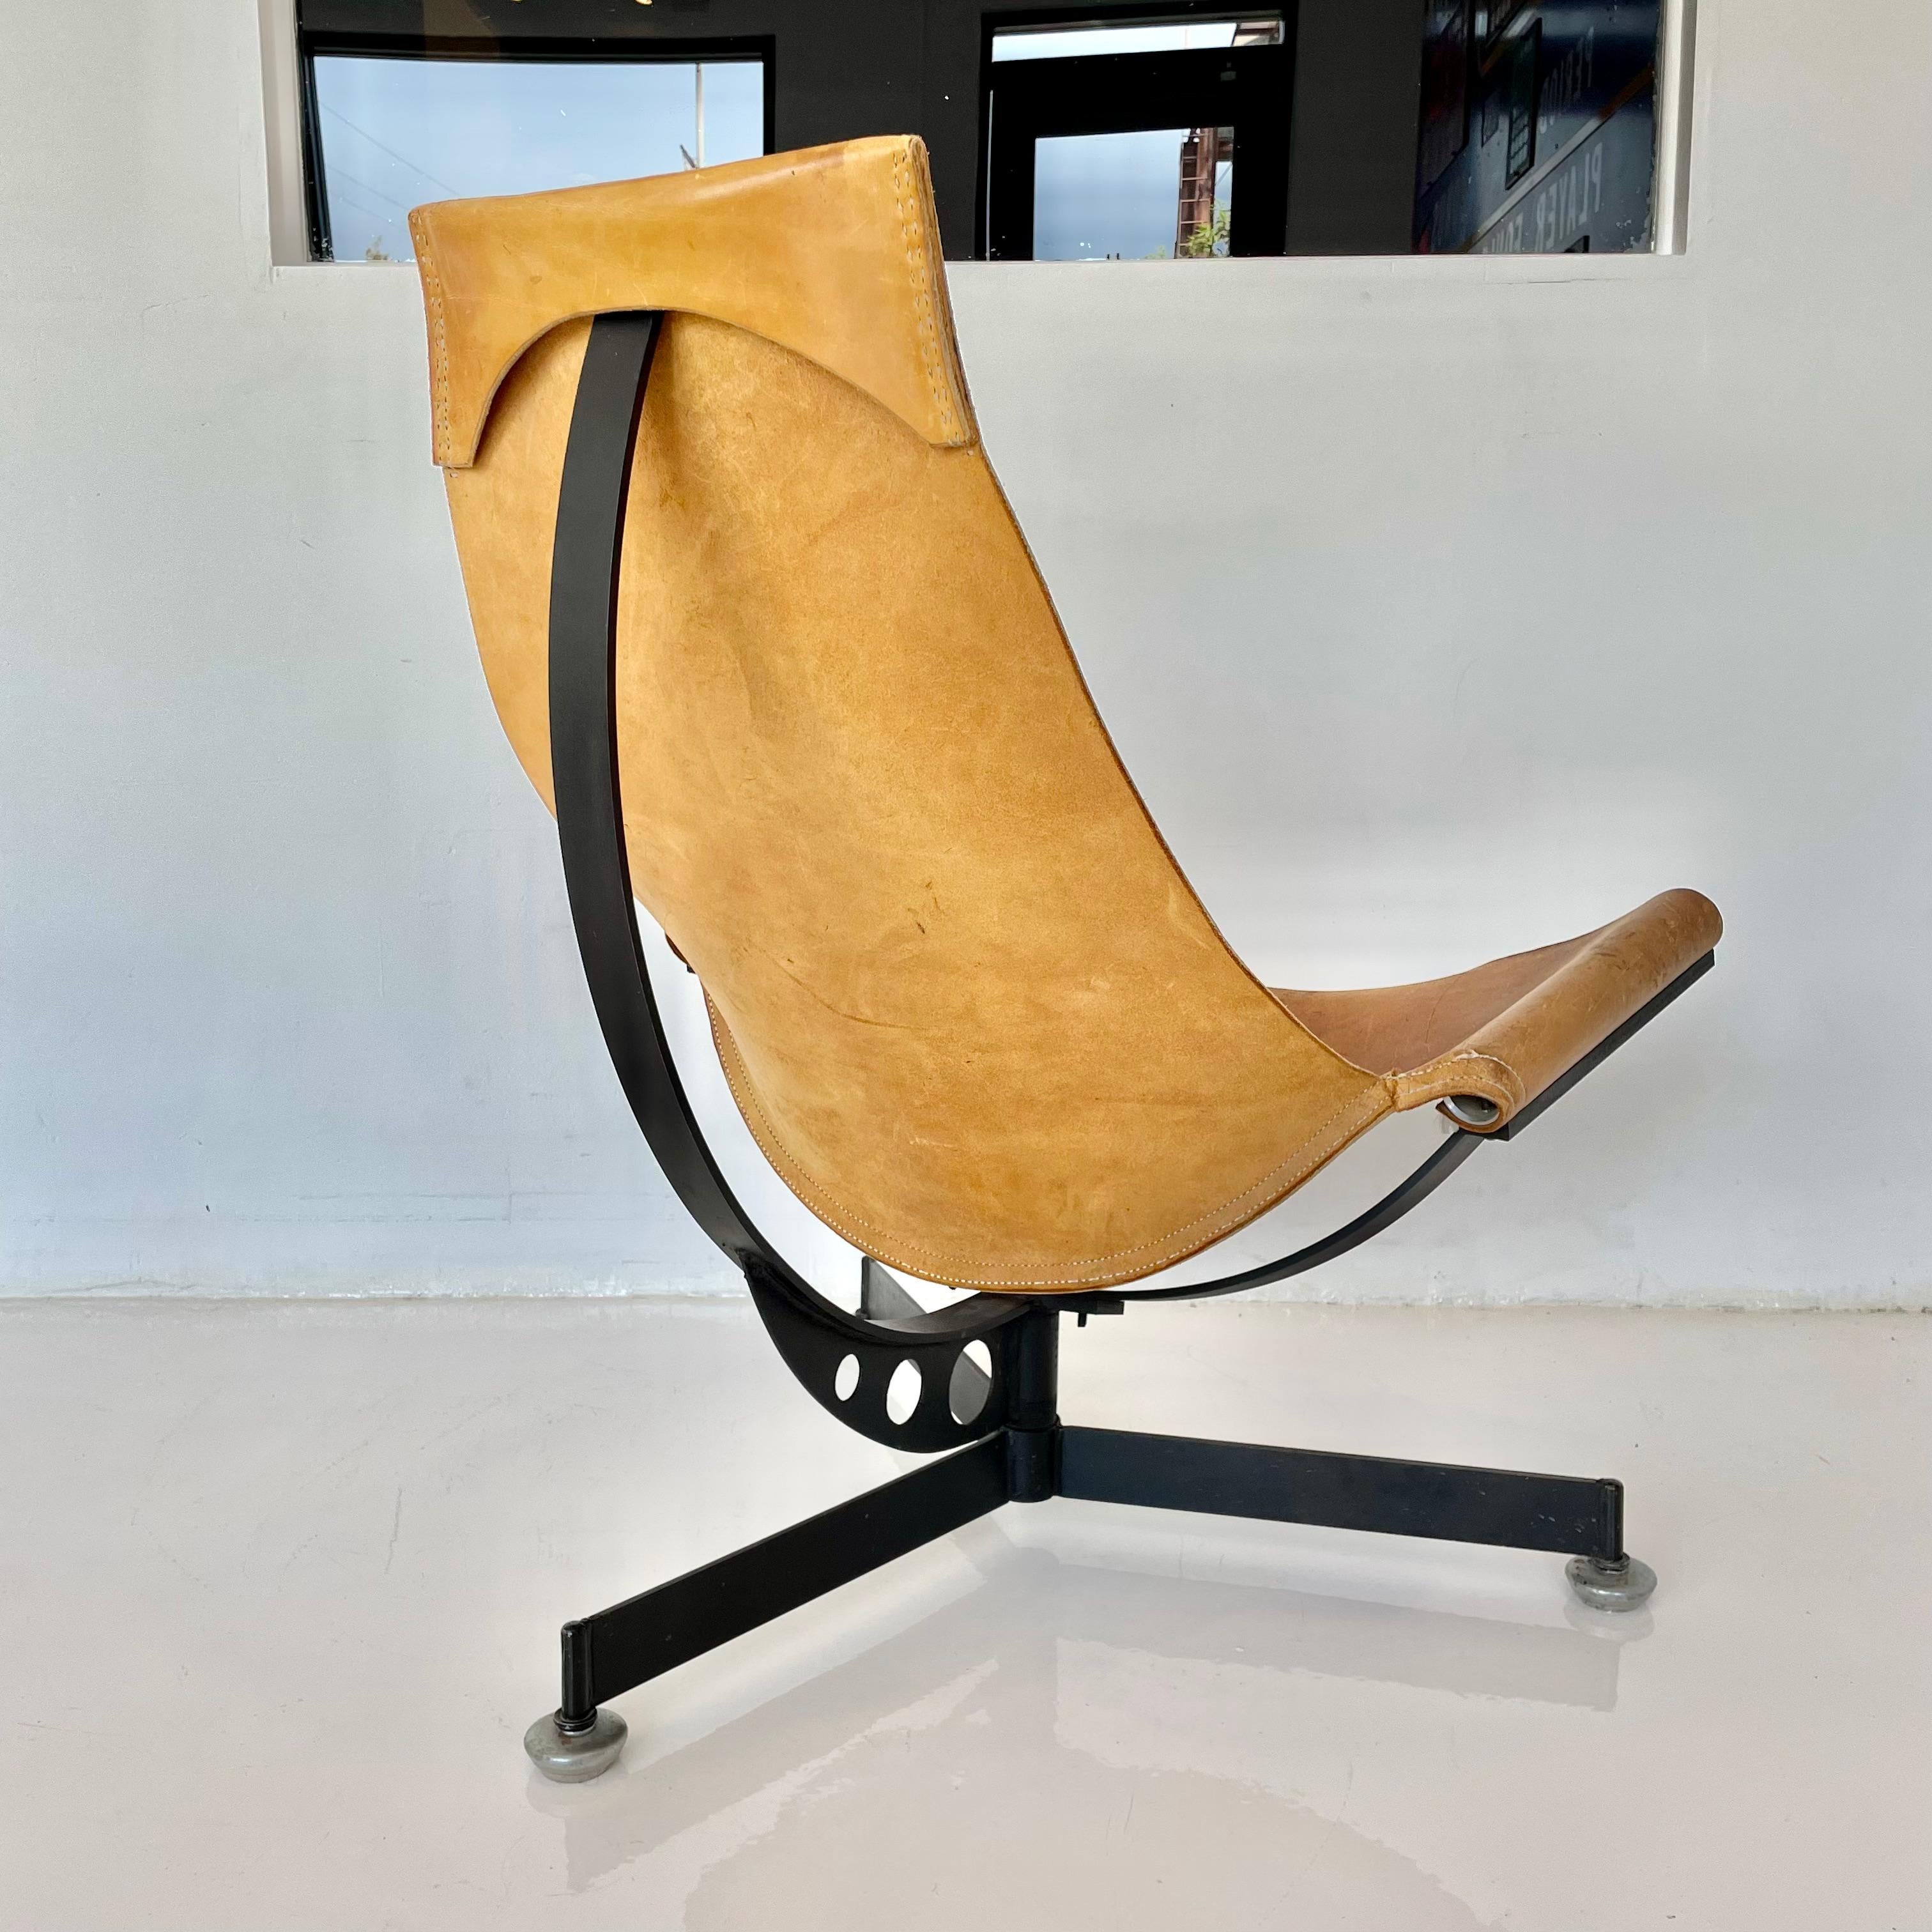 Max Gottschalk Leather and Iron Sling Chair, 1960s For Sale 4